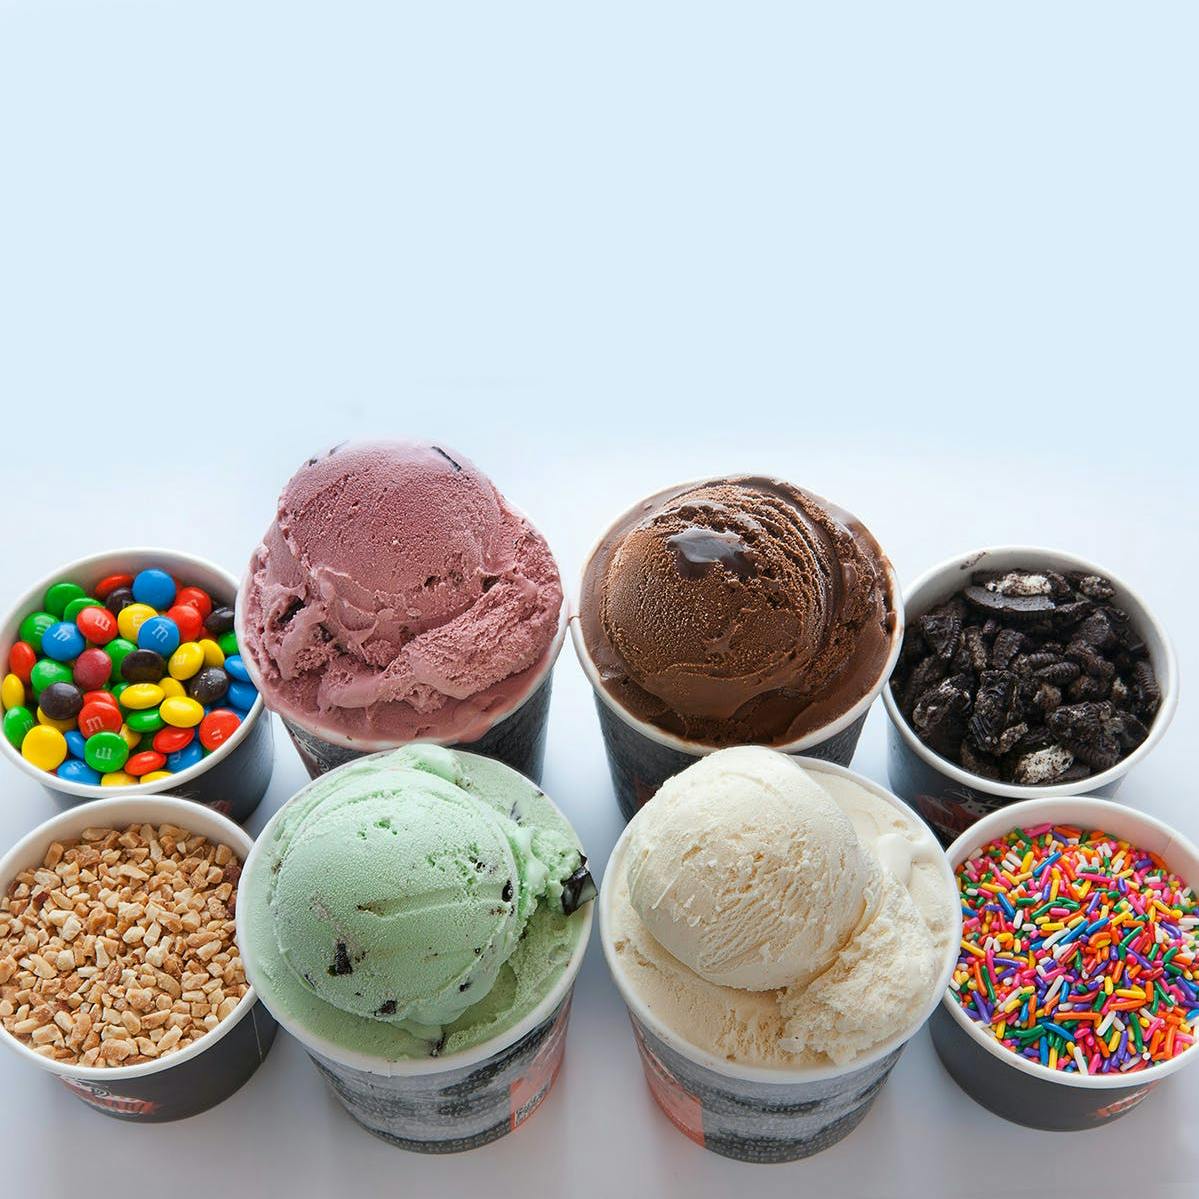 26 Best Ice Cream Shops in Chicago For A Frozen Treat